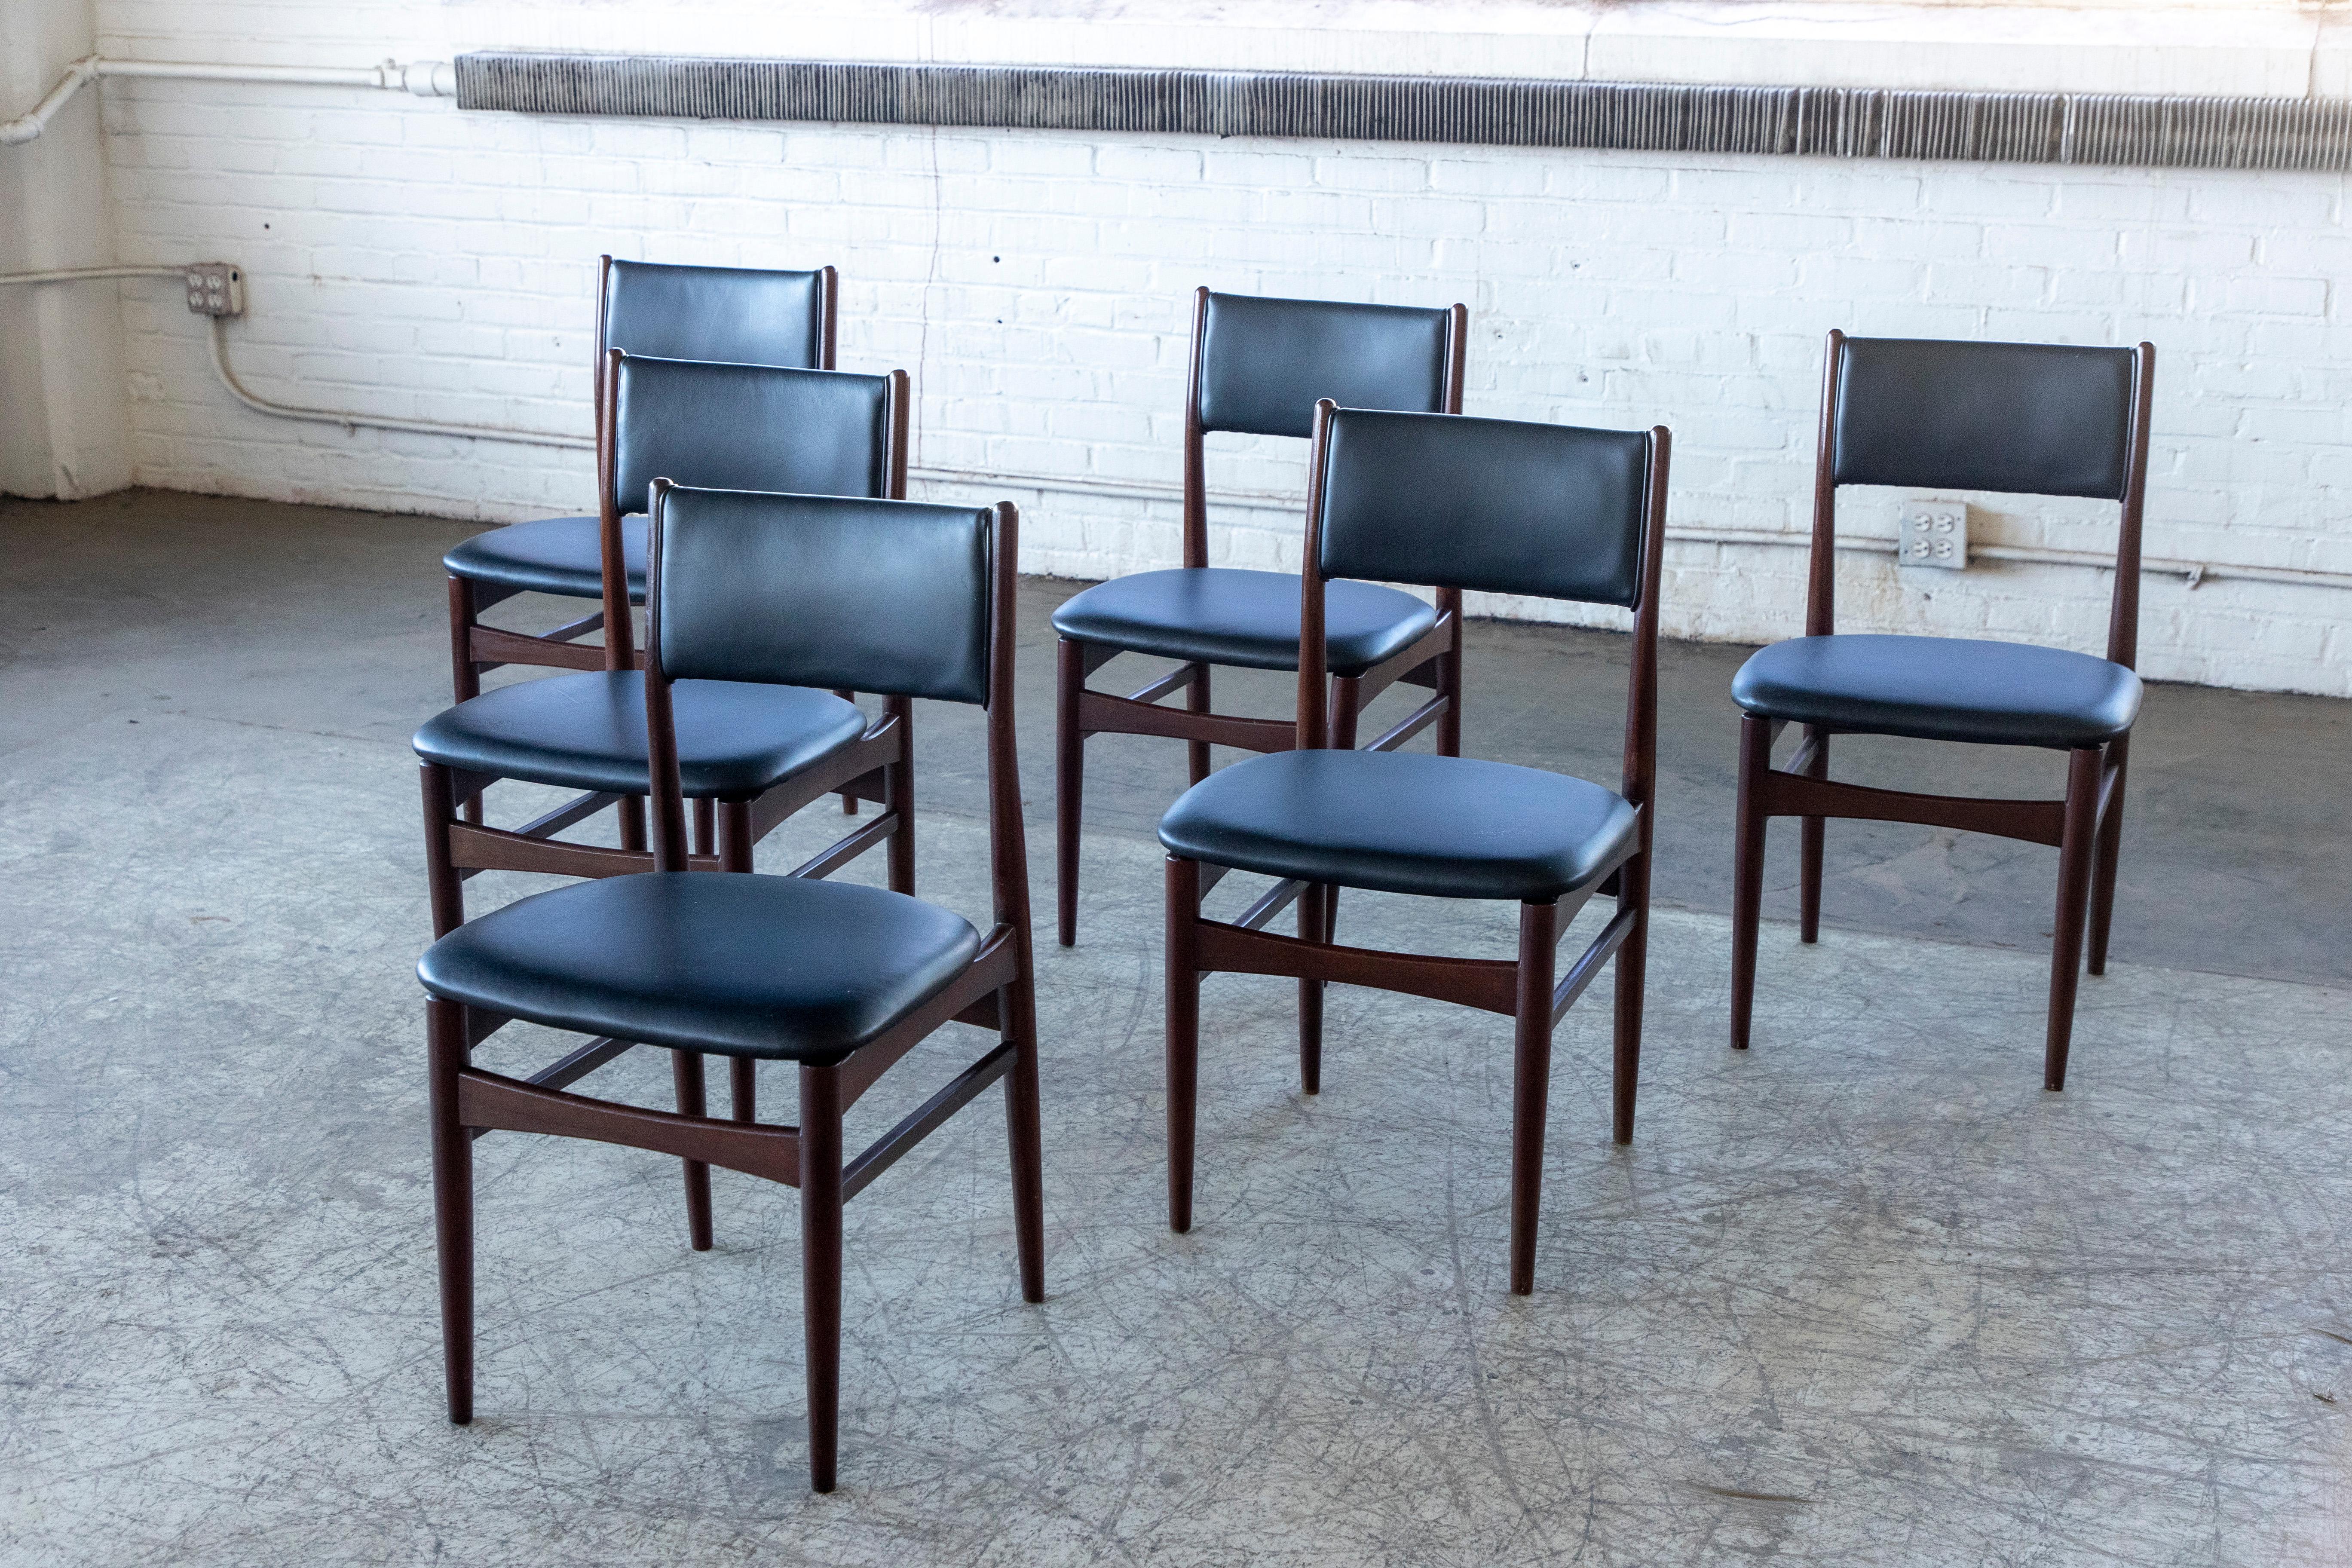 Set of six very stylish and traditional Danish midcentury dining chairs in the style of Erik Buch. Nice slim silhouette and beautiful in their simple yet refined lines. Made in the 1960's from teak and later recovered in black leather. Overall very